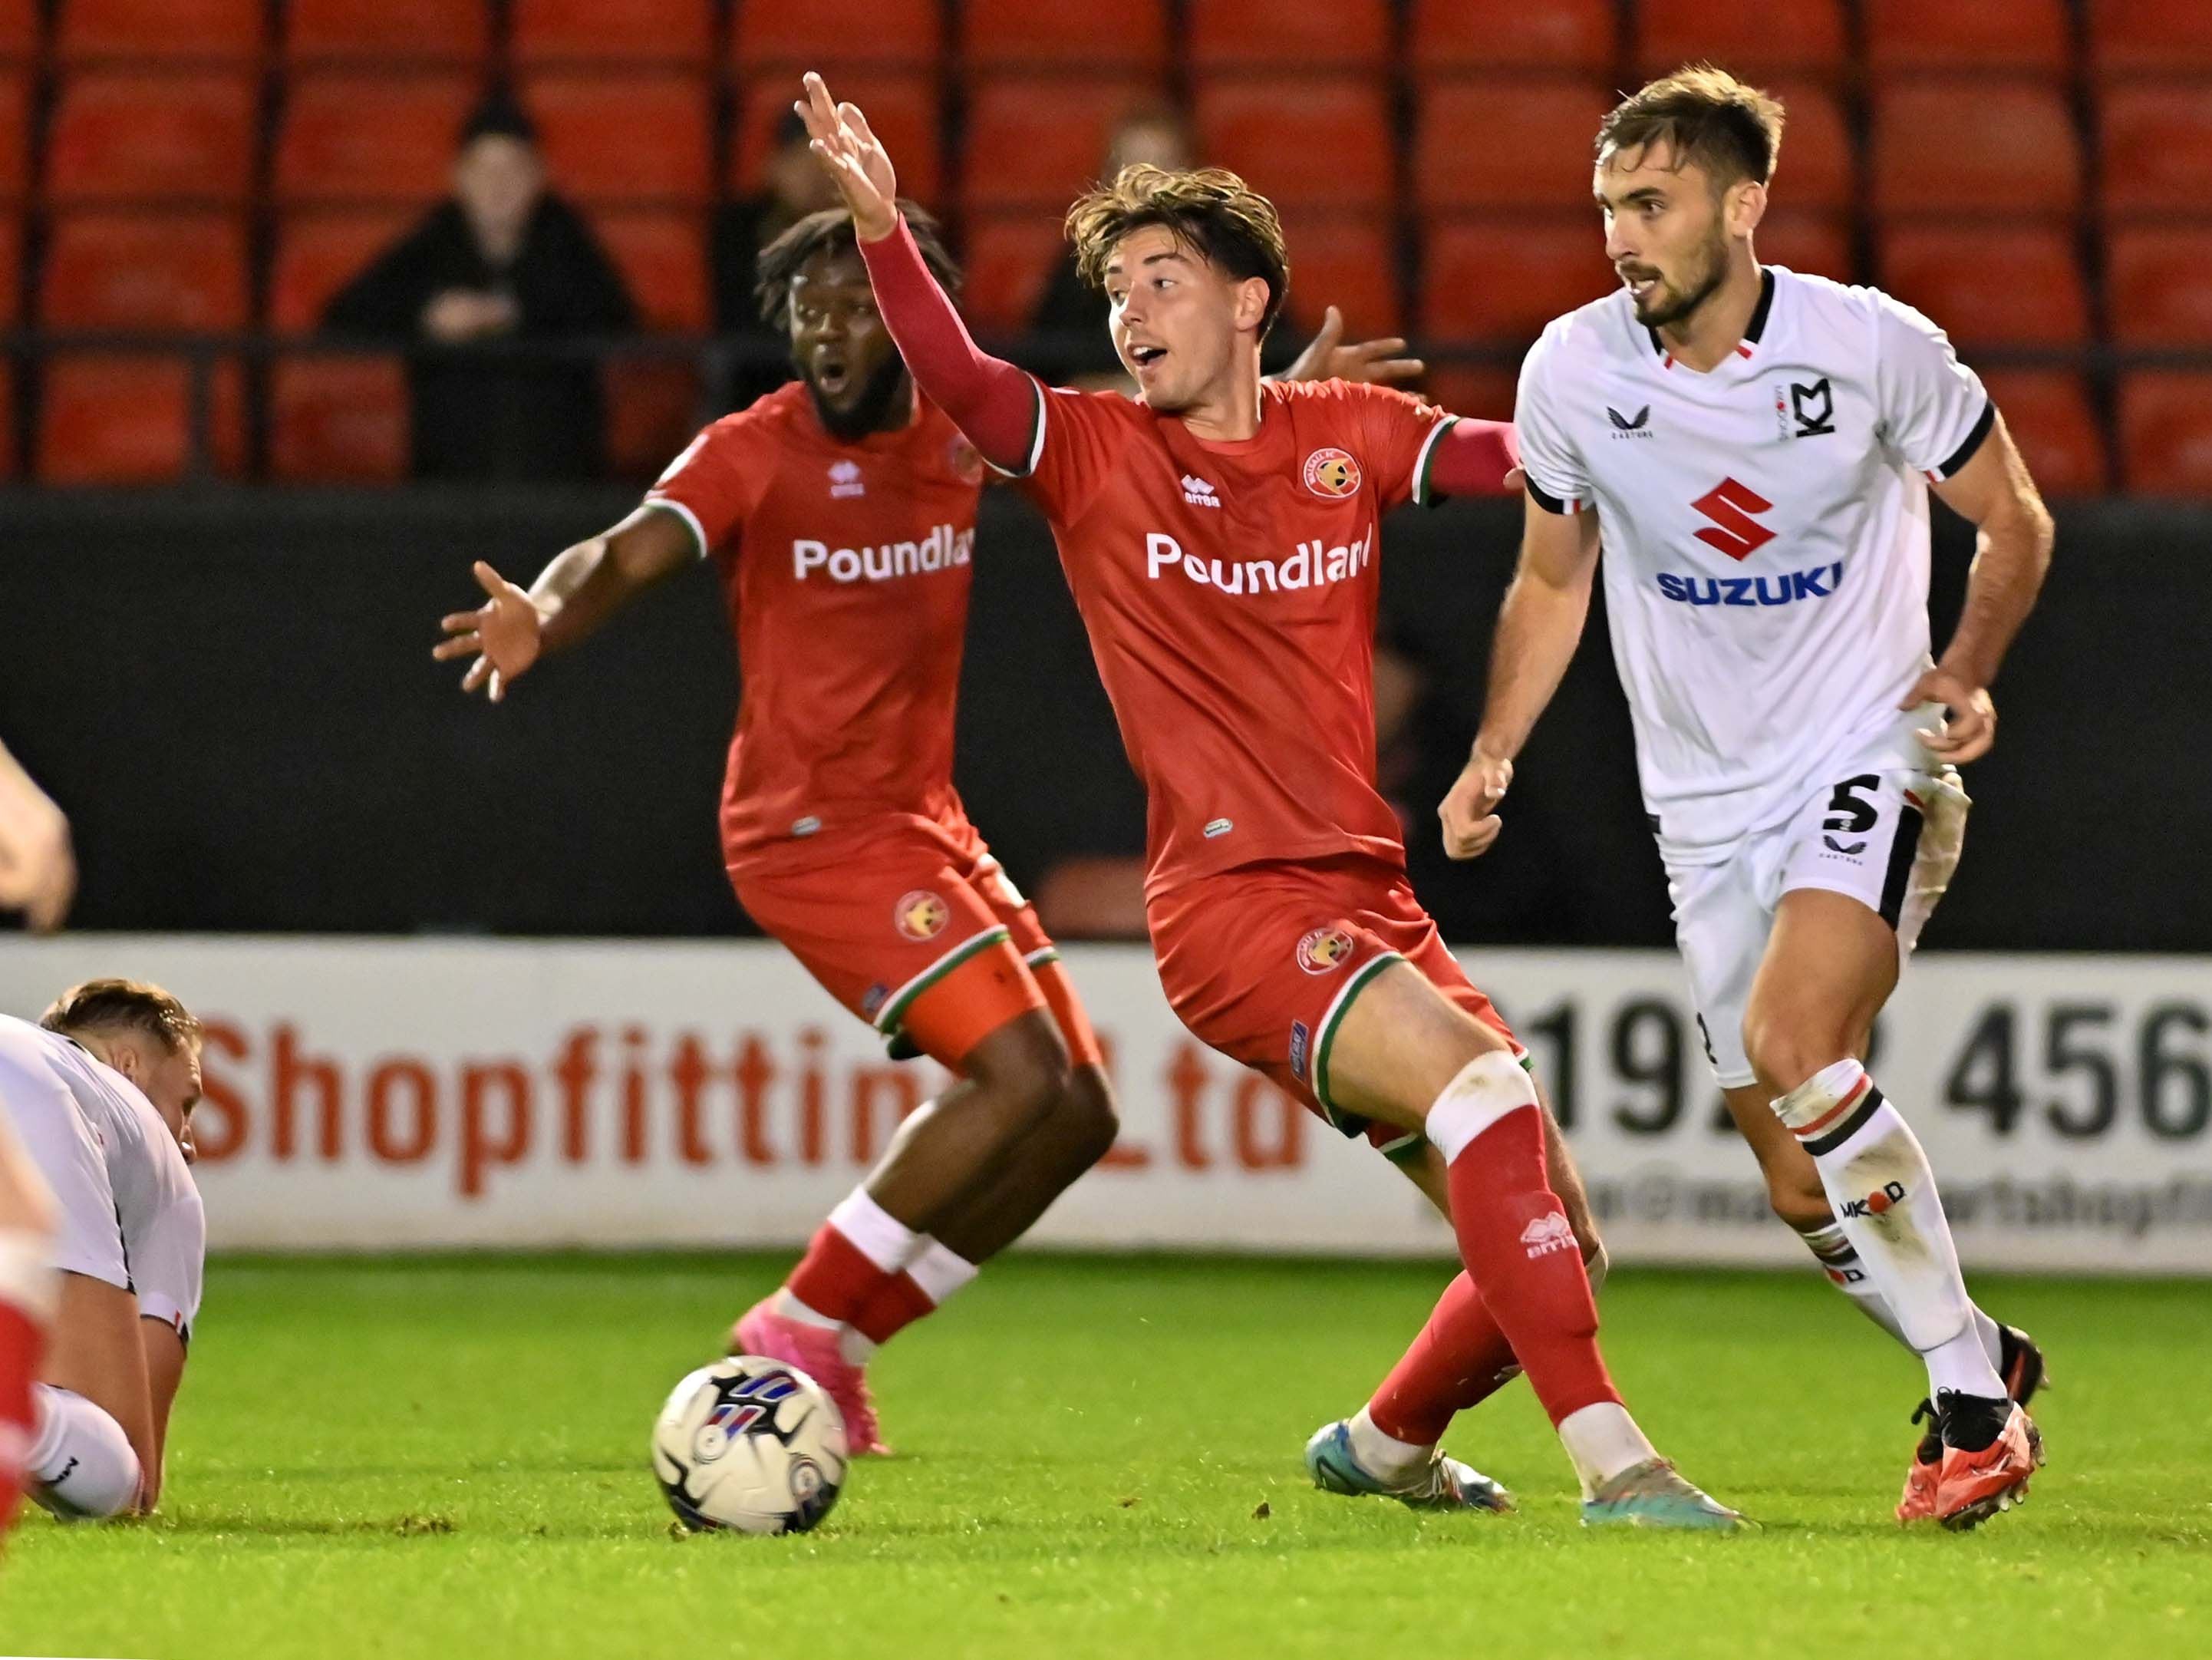 Walsall 0 MK Dons 0 - Report 